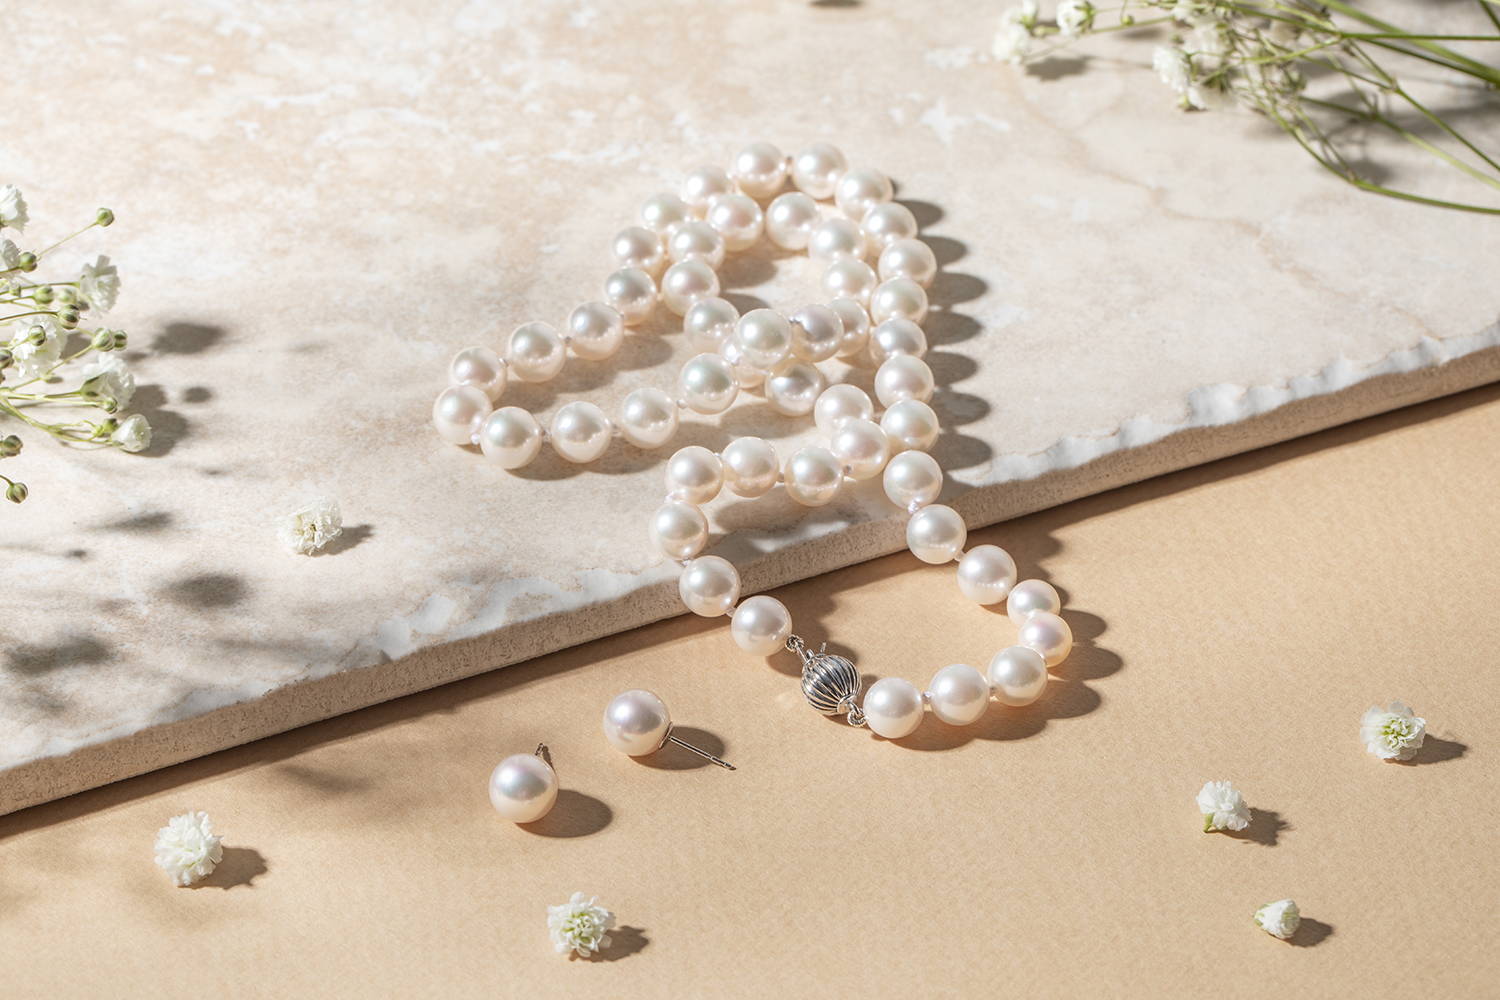 Three Techniques to Distinguish Genuine and Fake Pearls #pearl#jewelry